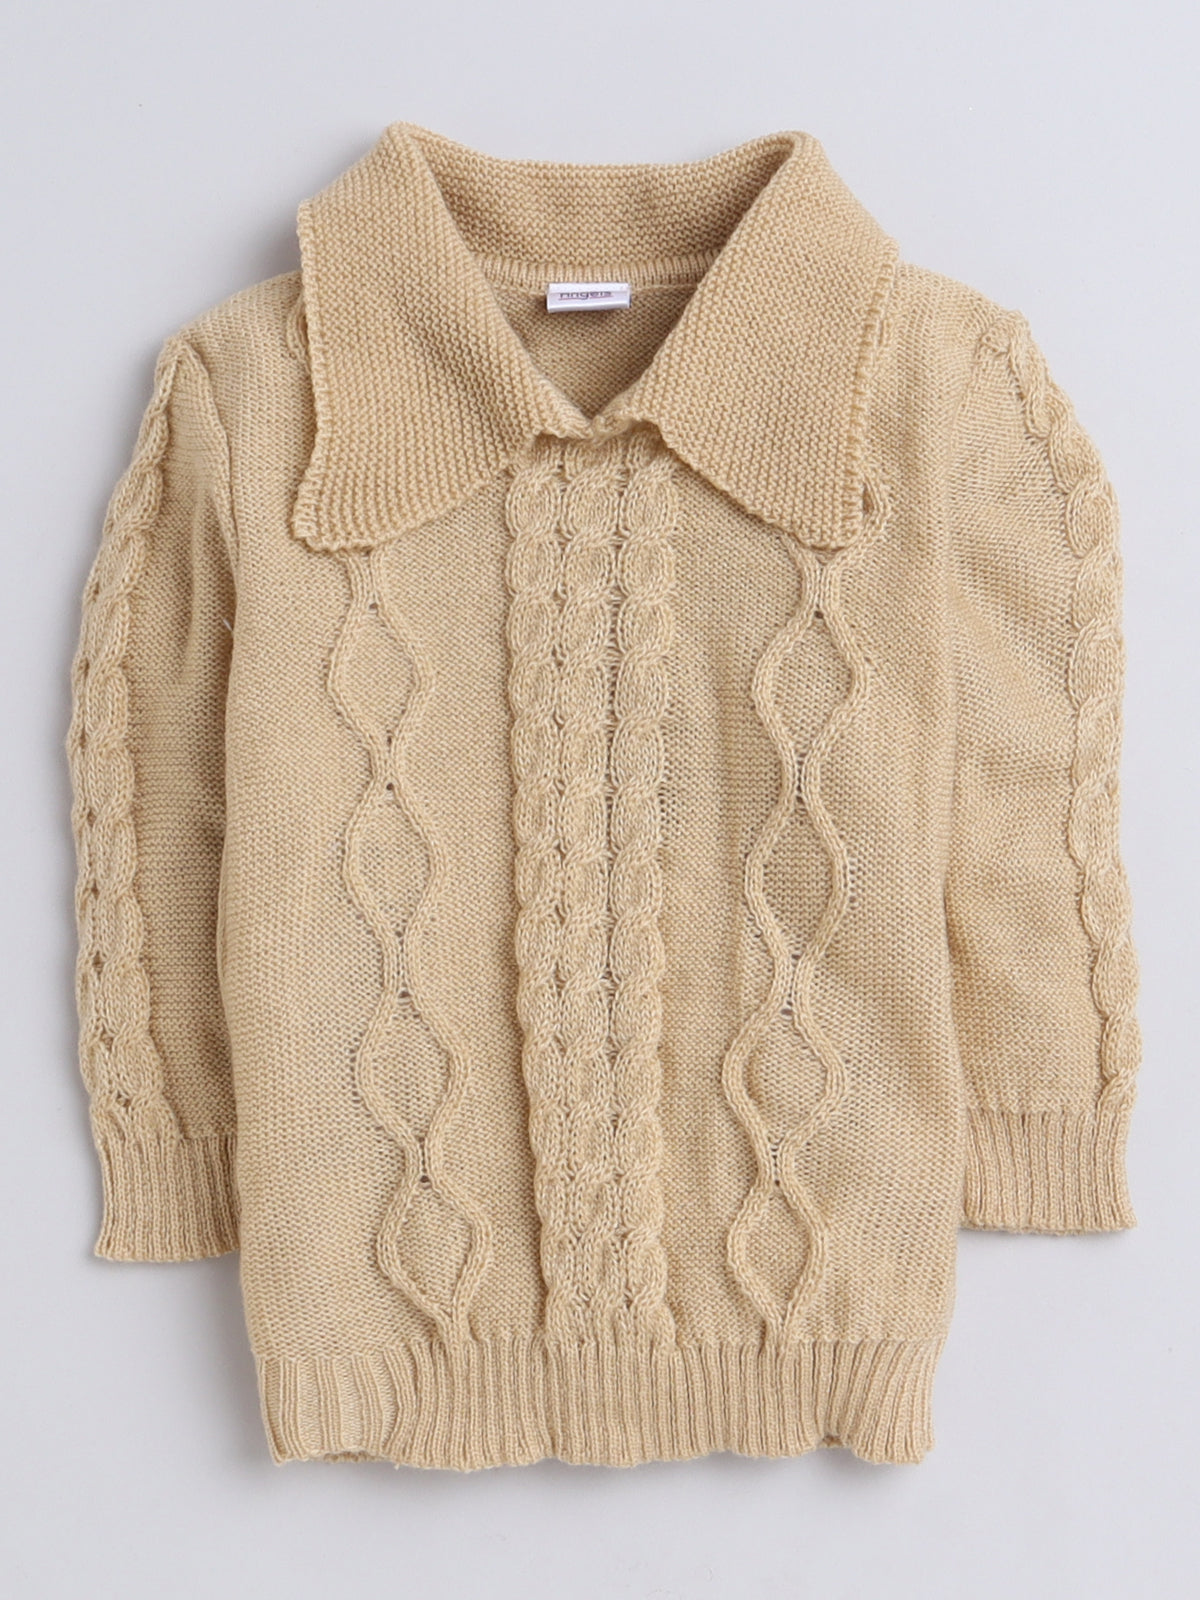 Little Angels Cozy Cable Knit Collared Pullover Set - Beige Sweater with Pant